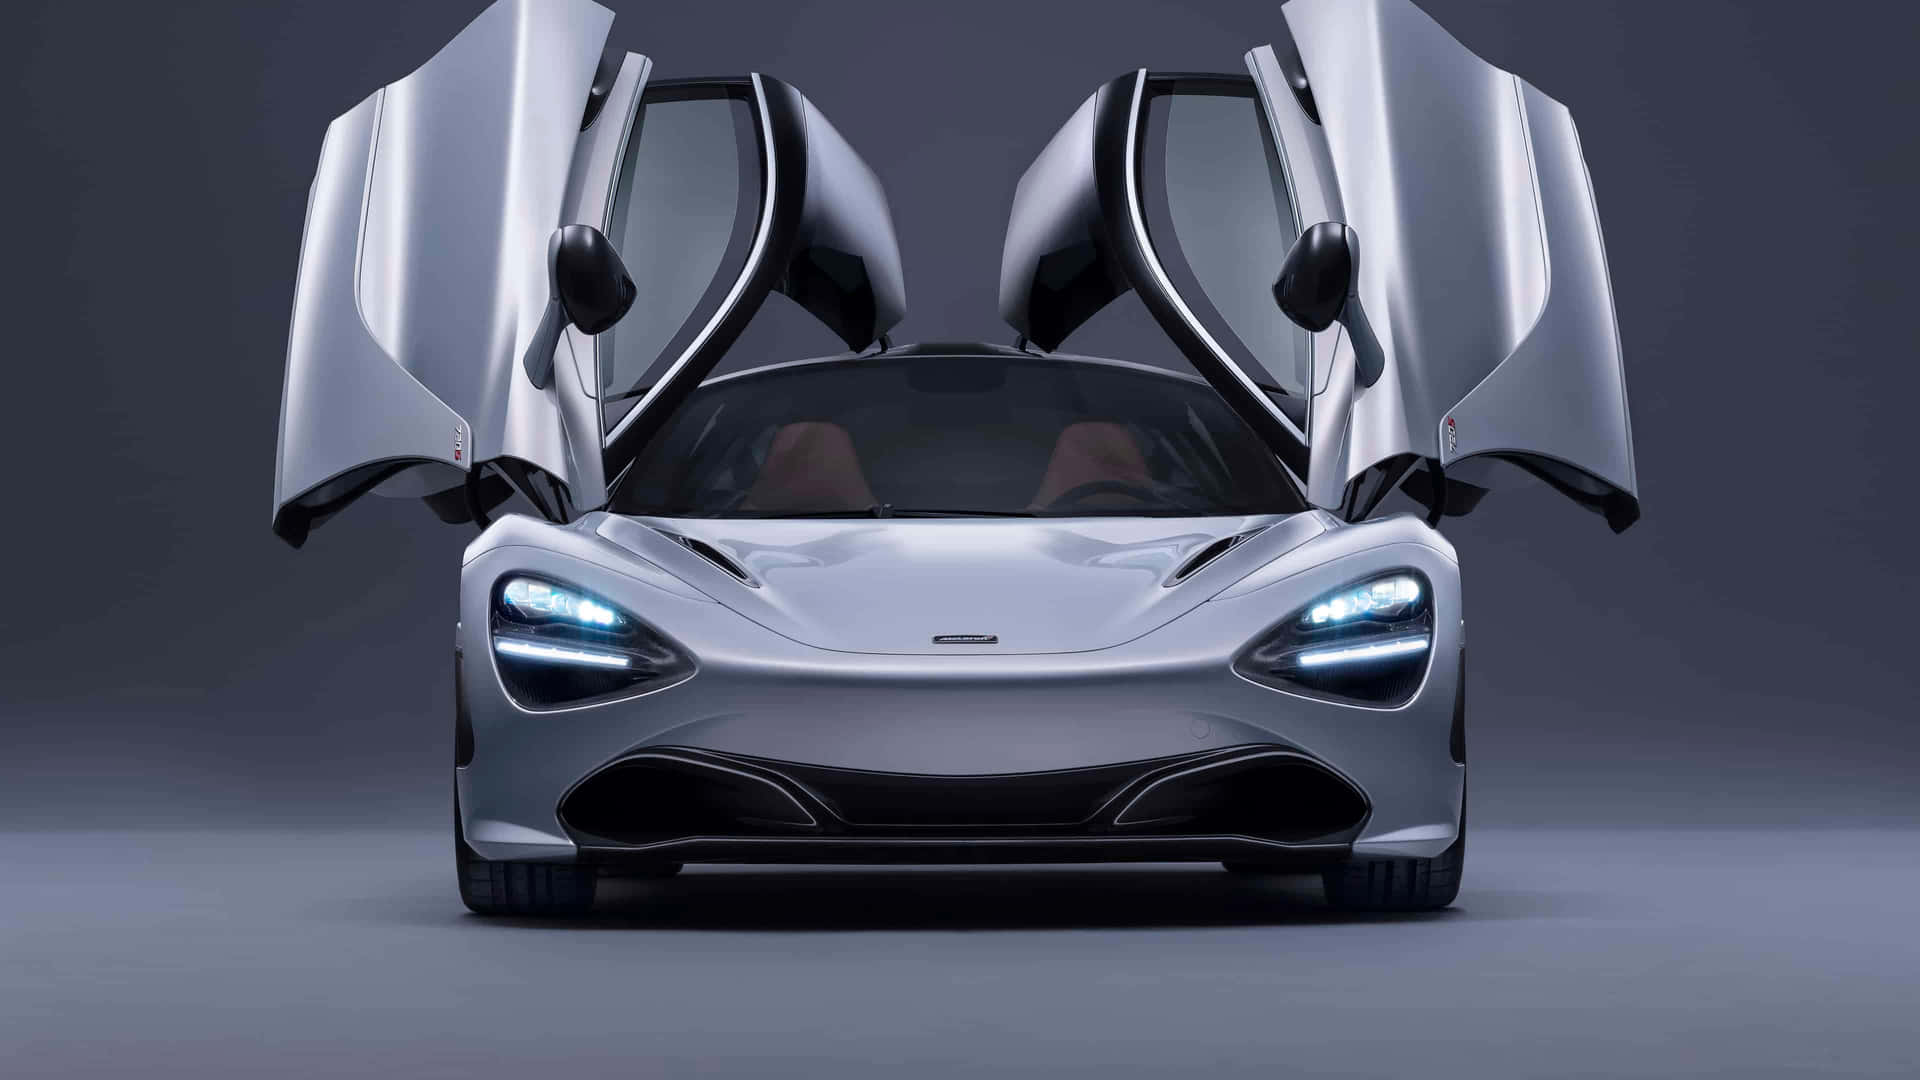 "Explore the power and style of the McLaren 720s"